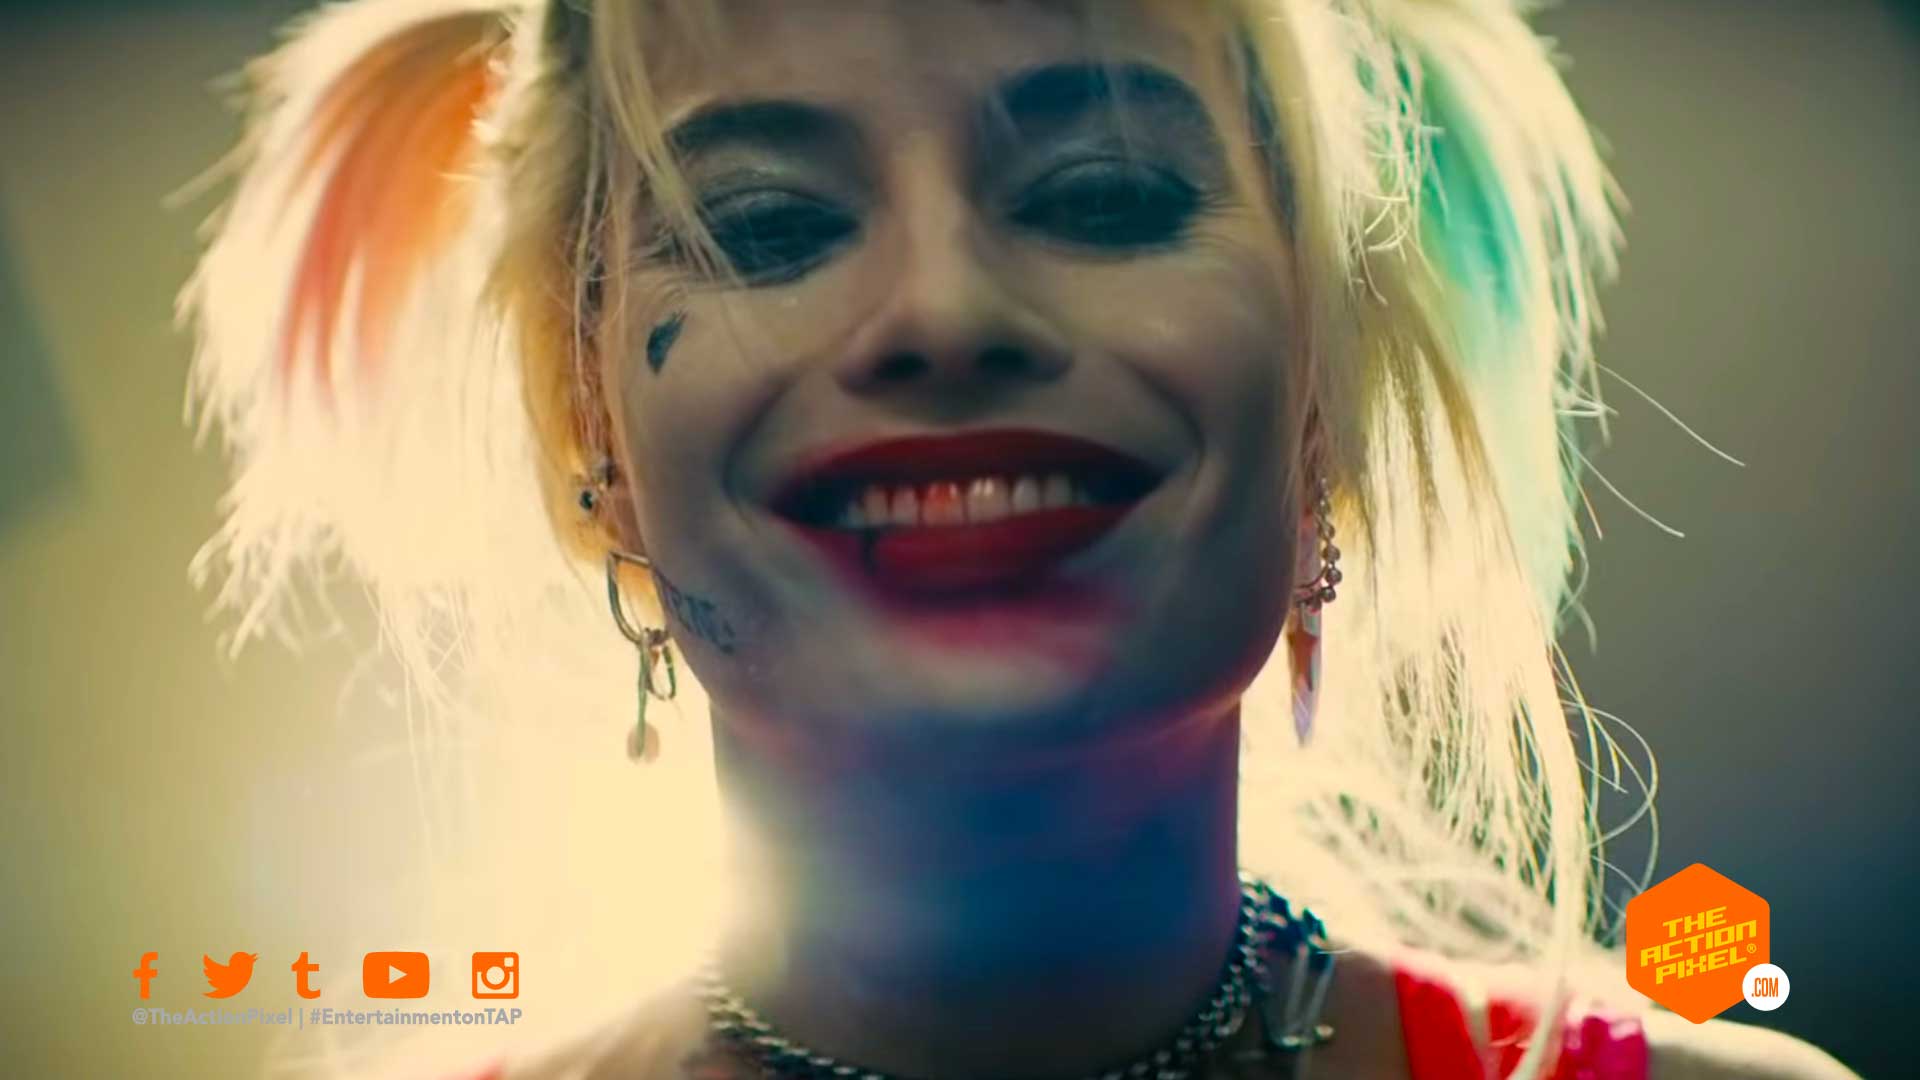 Birds Of Prey official trailer shows Harley Quinn embracing